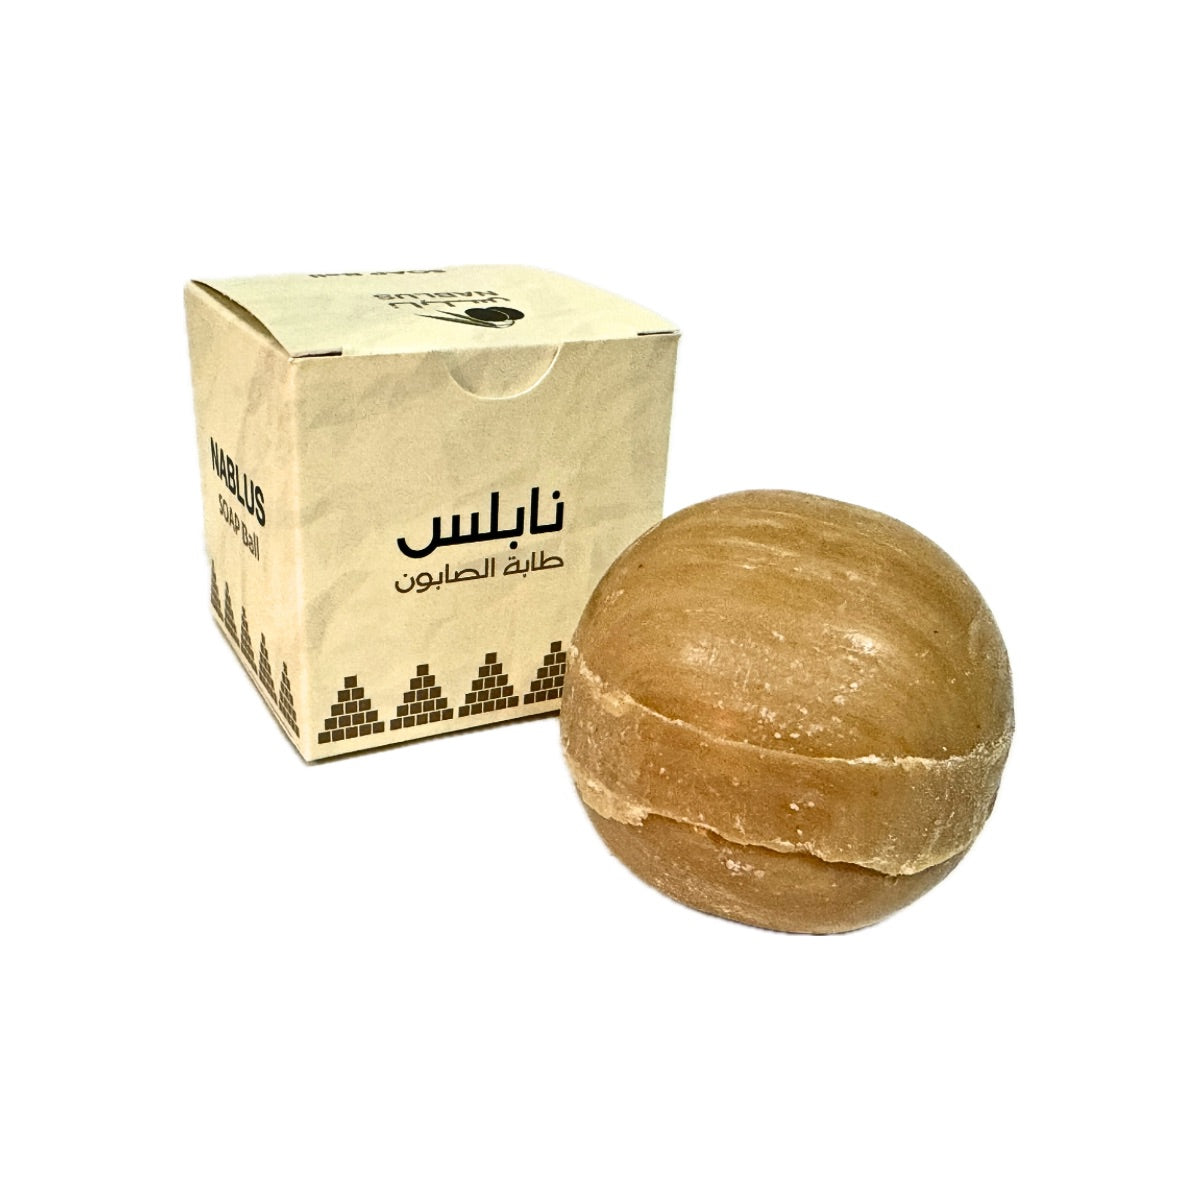 Olive Oil Ball Soap from Nablus